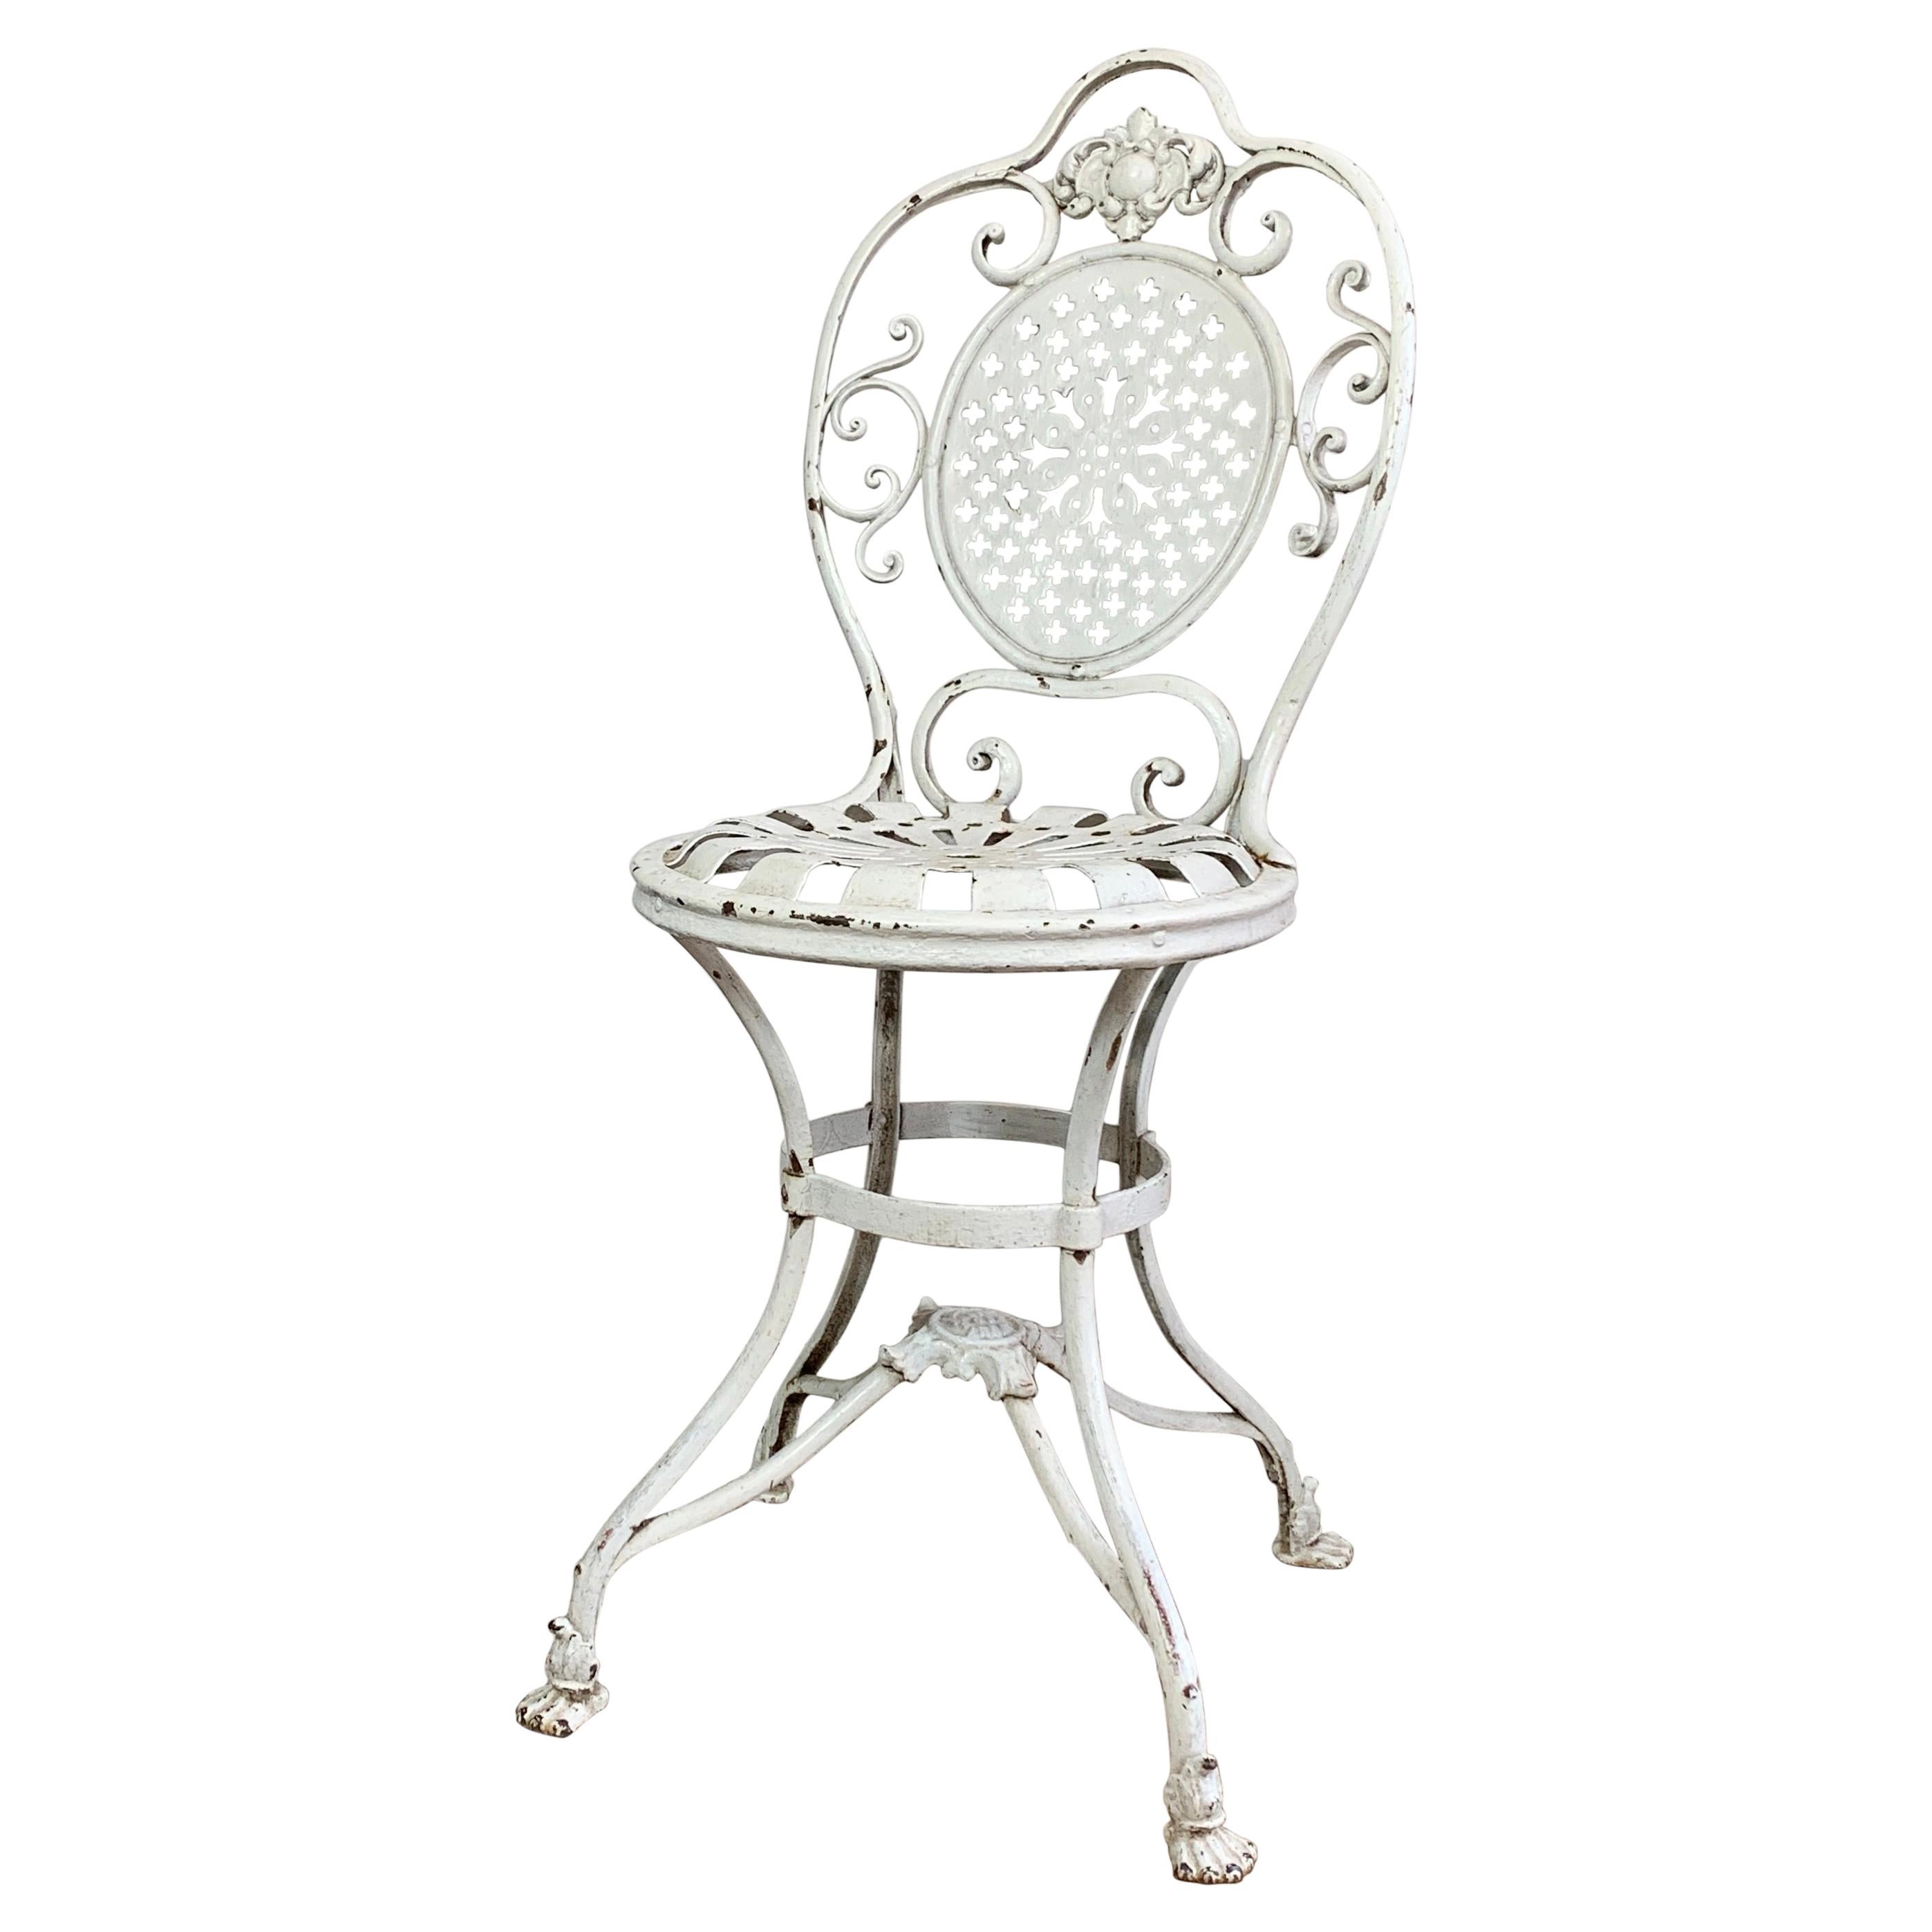 19th Century White Lions Paw Arras Orangery Chair For Sale